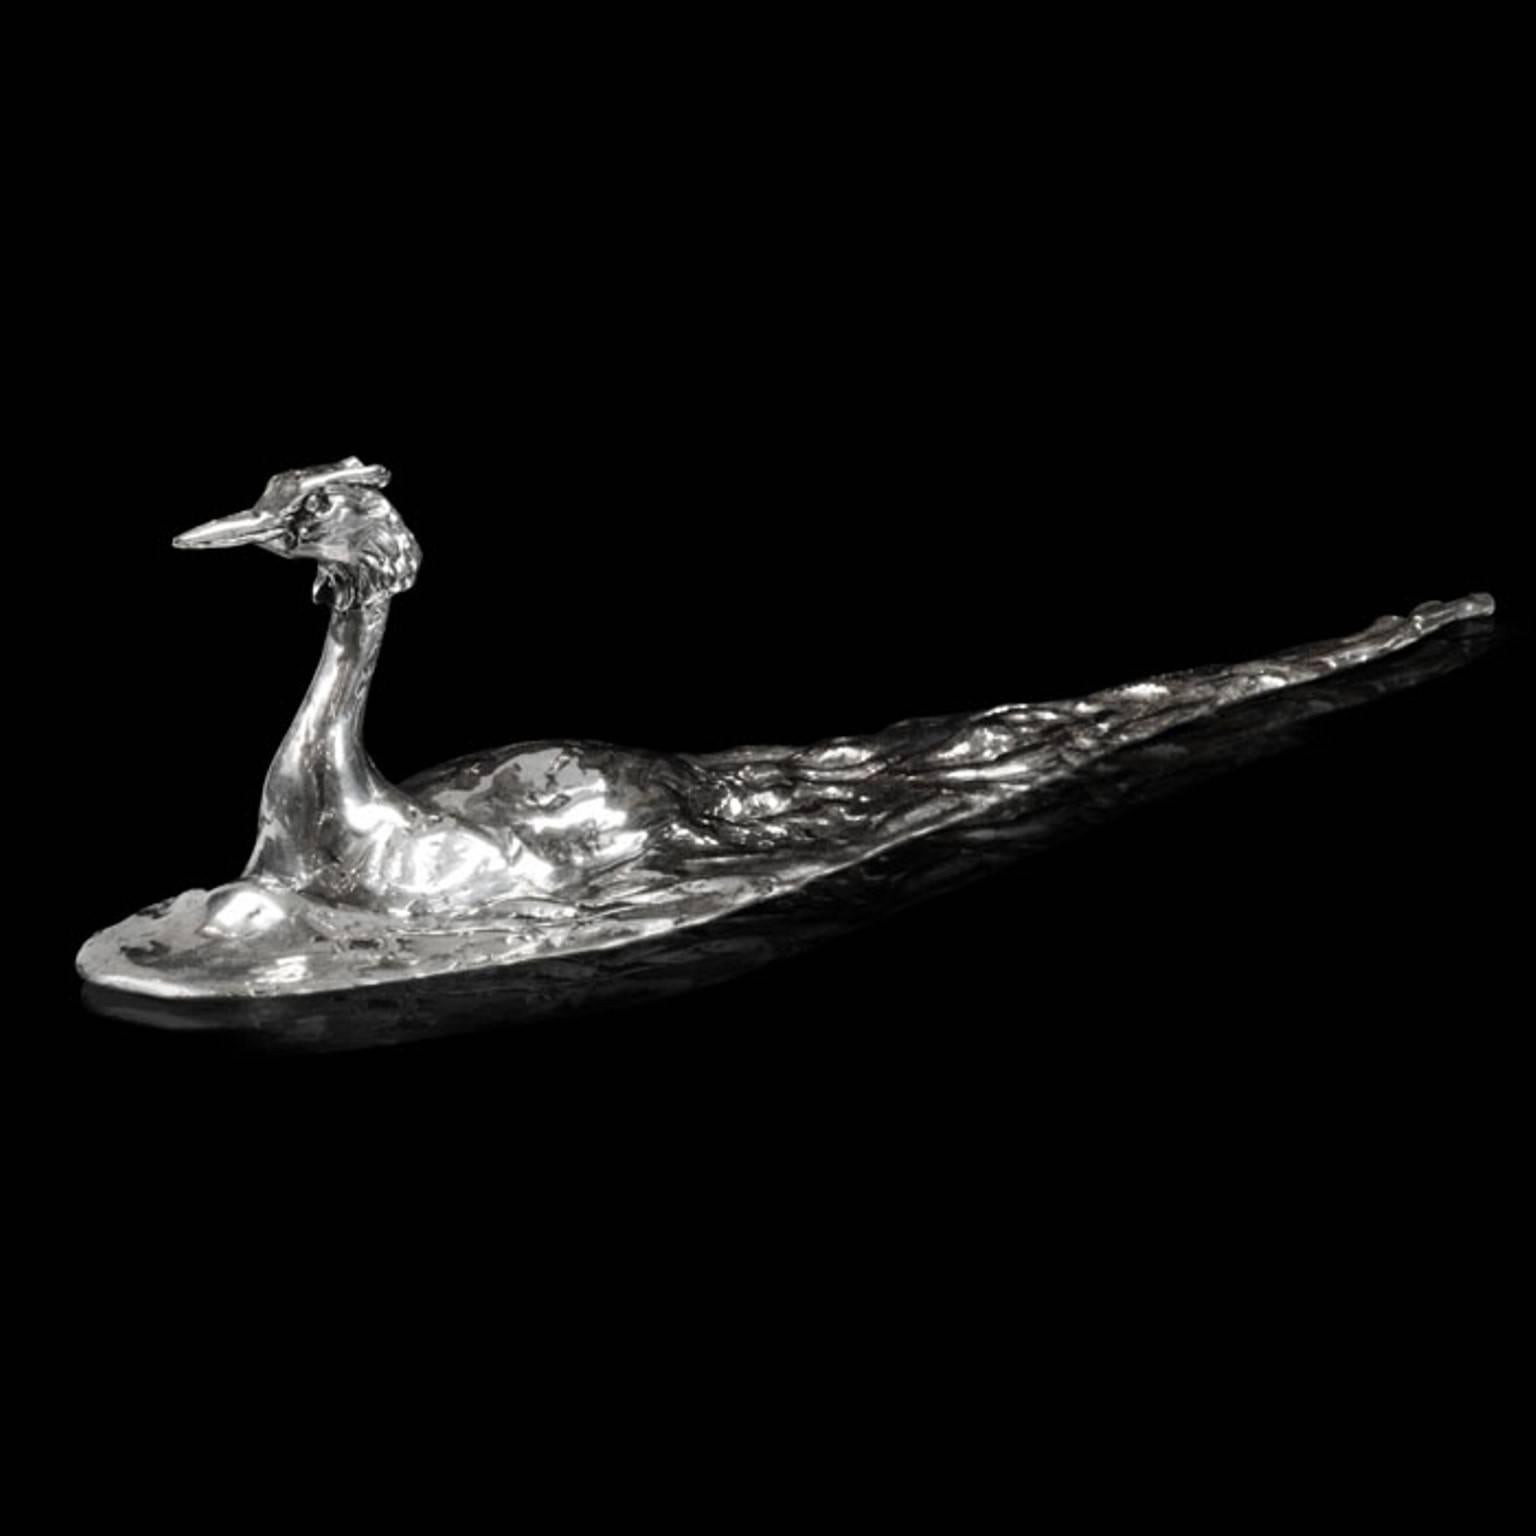 A 'Great Crested Grebe' sterling silver sculpture by Lucy Kinsella, the limited edition finely modelled great crested grebe glides serenely through the gently rippling water, its long elegant neck stretched upright and head topped with elaborate